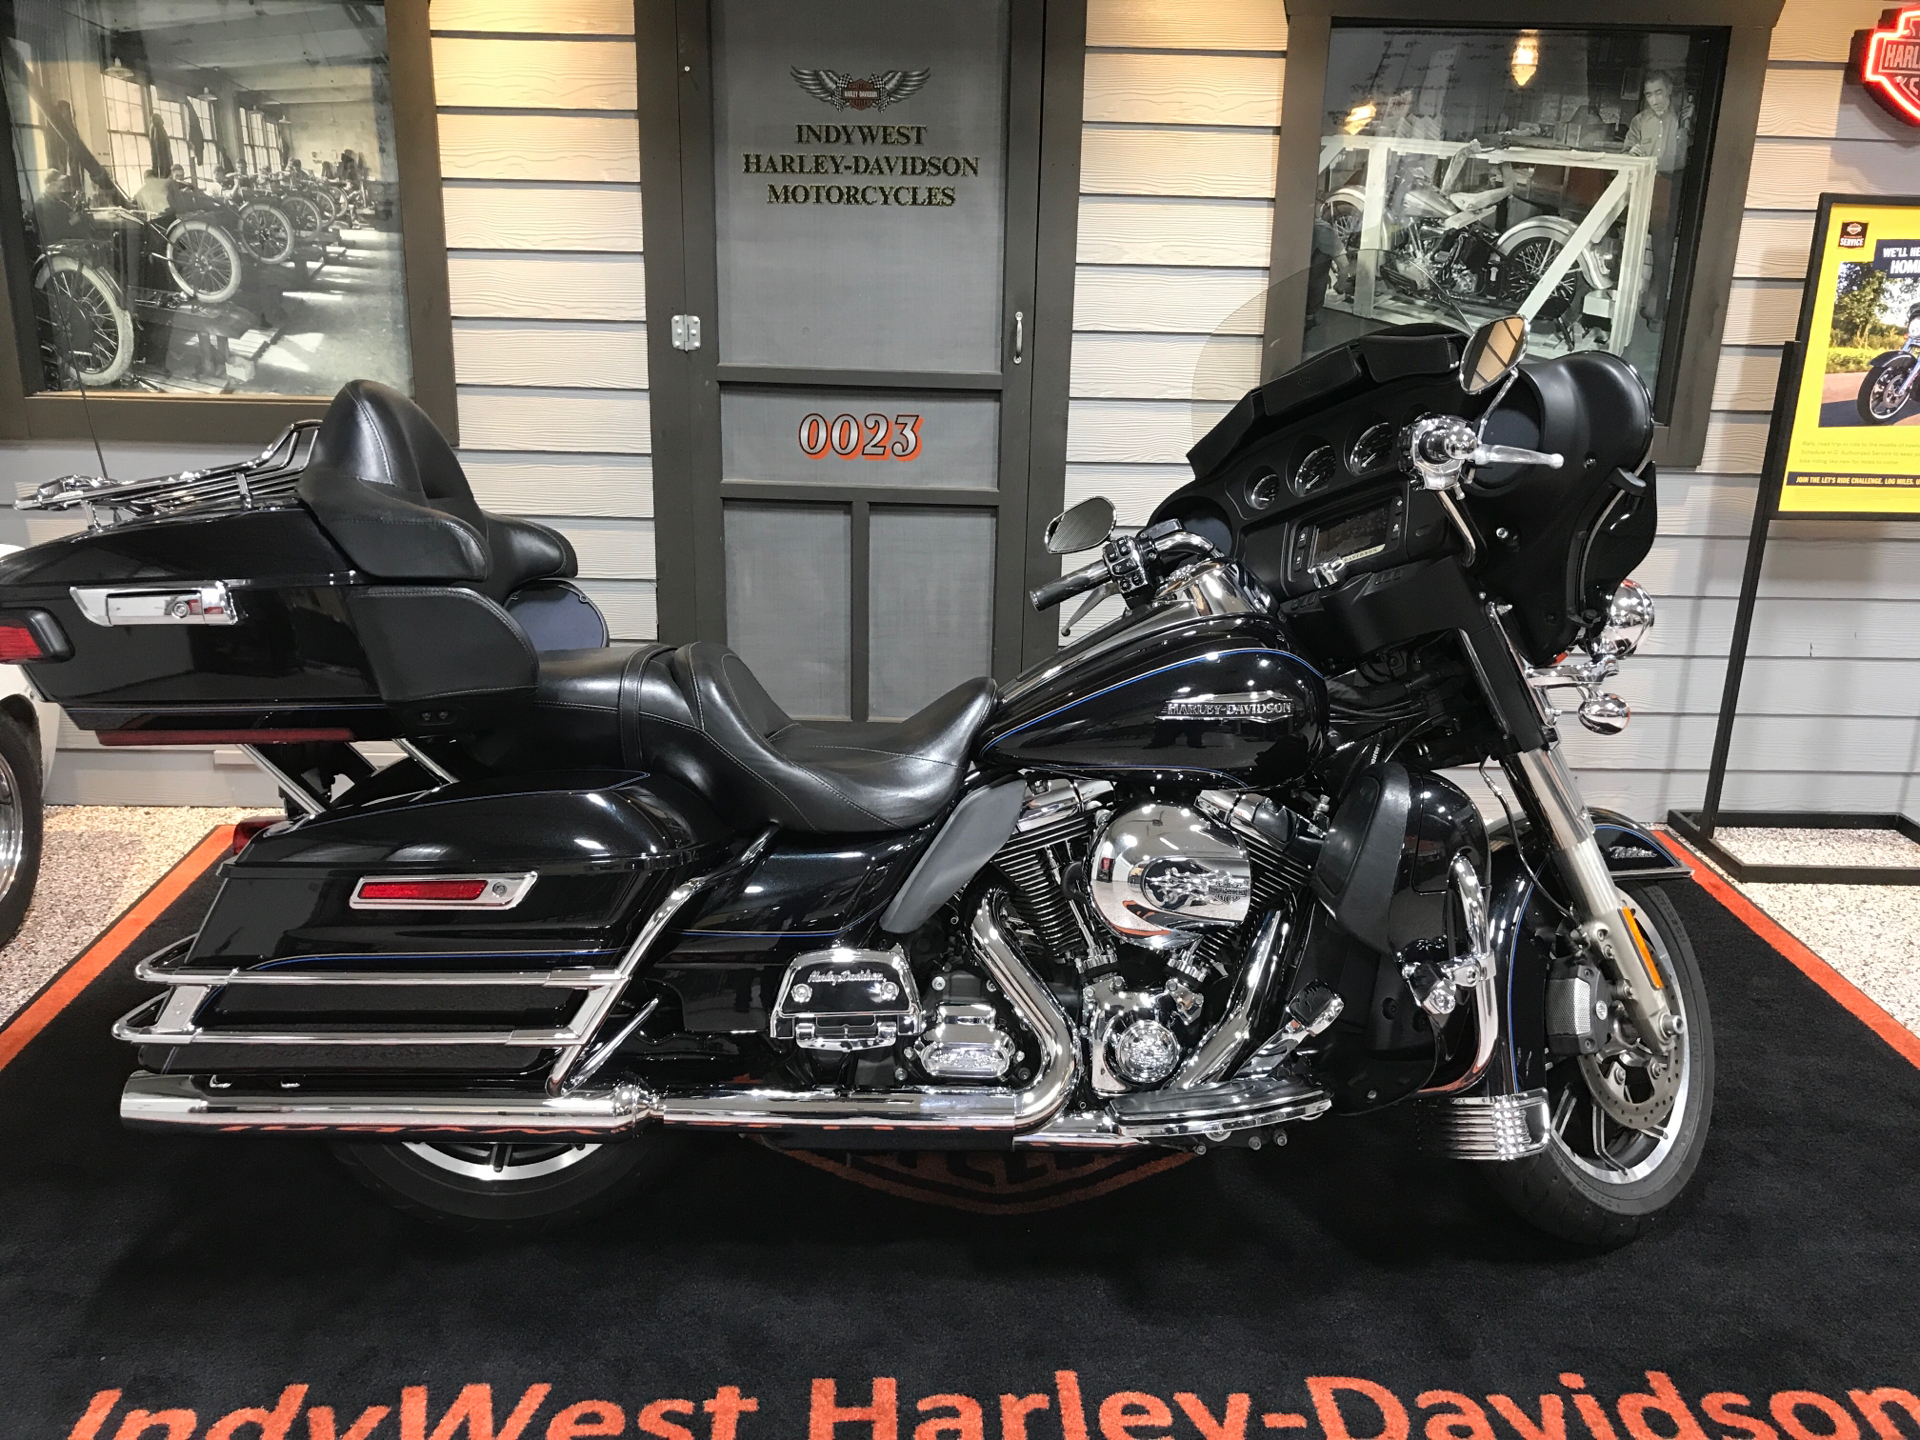 Used 2014 Harley Davidson Electra Glide Ultra Classic Midnight Pearl Motorcycles In Plainfield In 690864